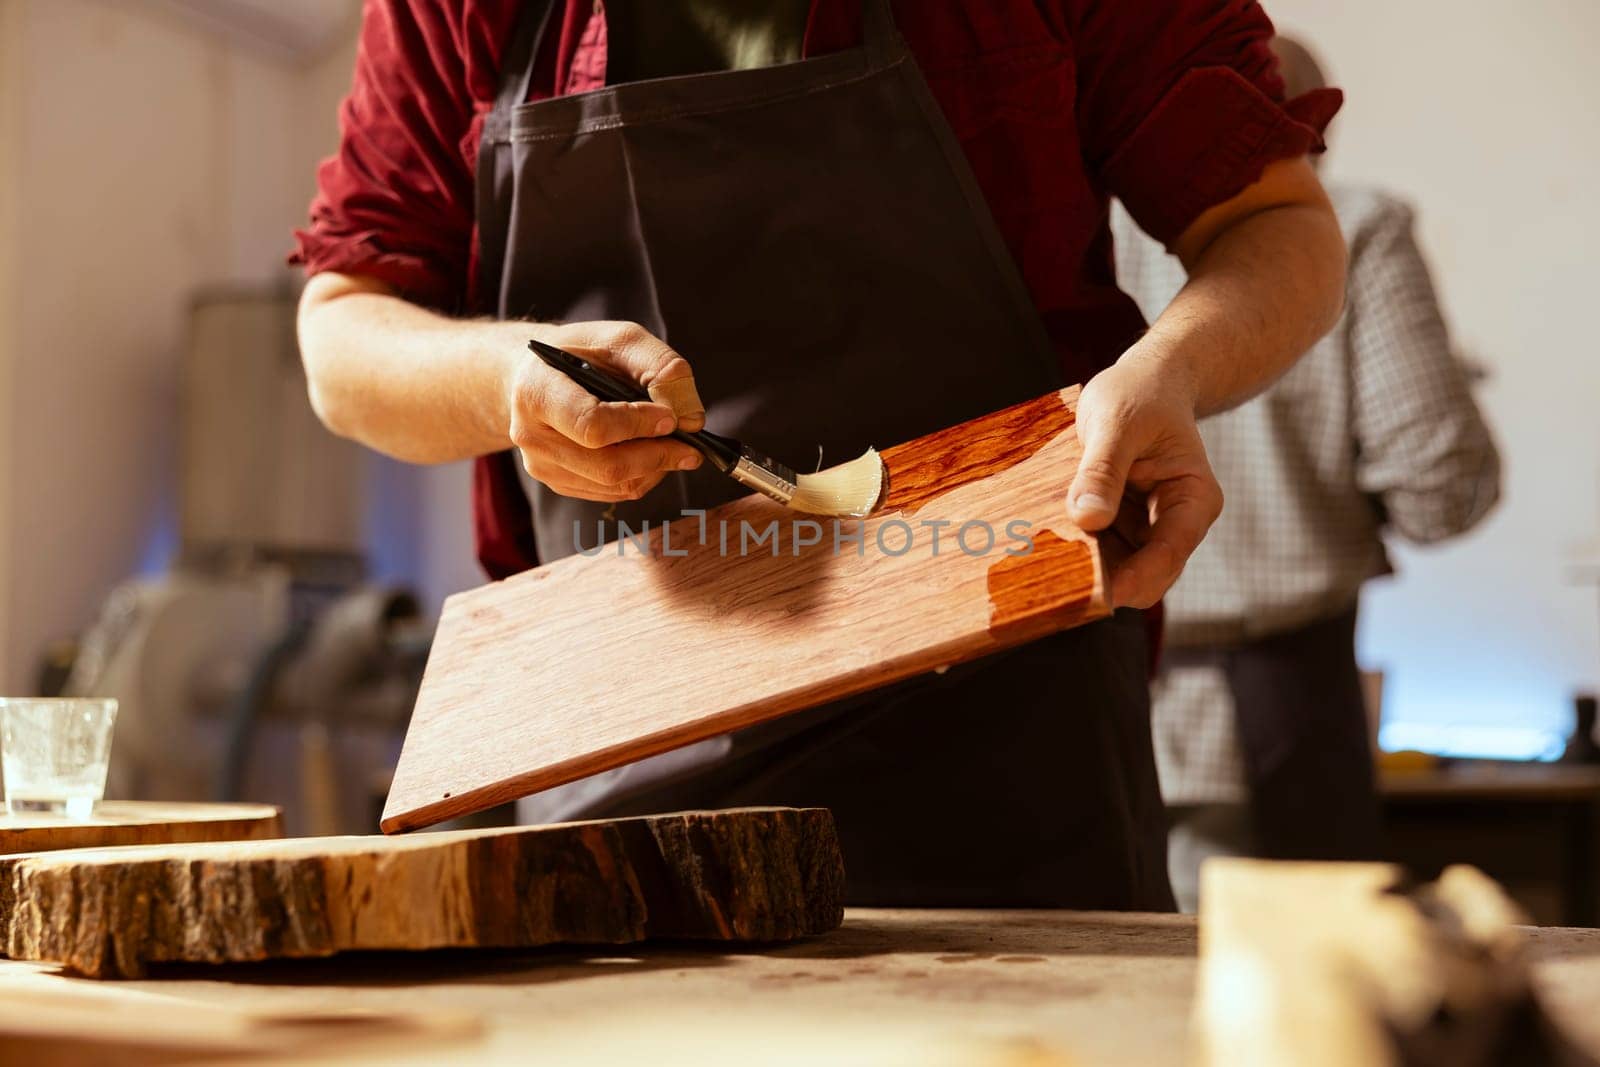 Woodworking specialist applying varnish on wood to build up protective layer. Carpenter in assembly shop lacquering wooden board after sanding surface to ensure smoothness, close up shot